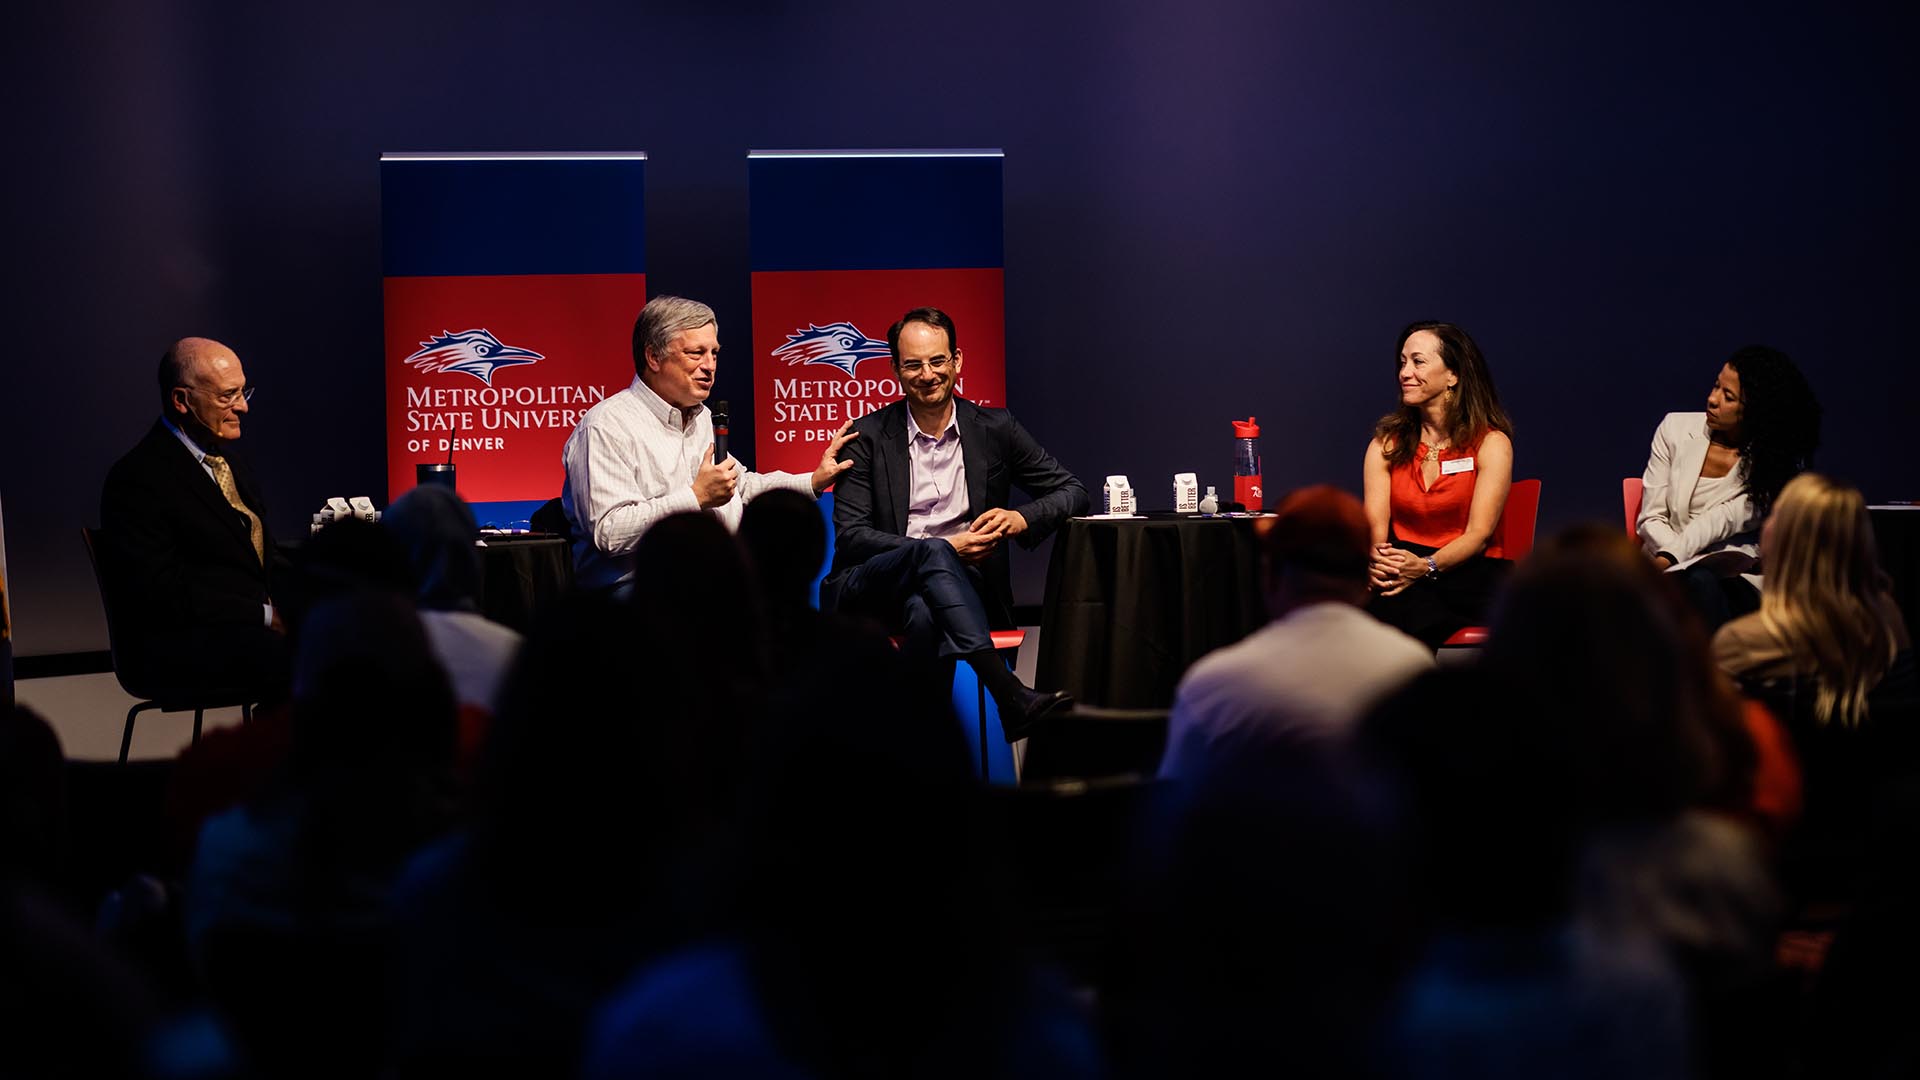 From left to right, MSU Denver General Counsel David Fine, former Colorado Secretary of State Wayne Williams (a Republican), Colorado Attorney General Phil Weiser (a Democrat), MSU Denver President Janine Davidson, Ph.D., and Professor and Chair of Communication Studies Katia Campbell, Ph.D., in a conversation titled Free Speech and the Art of Democracy.